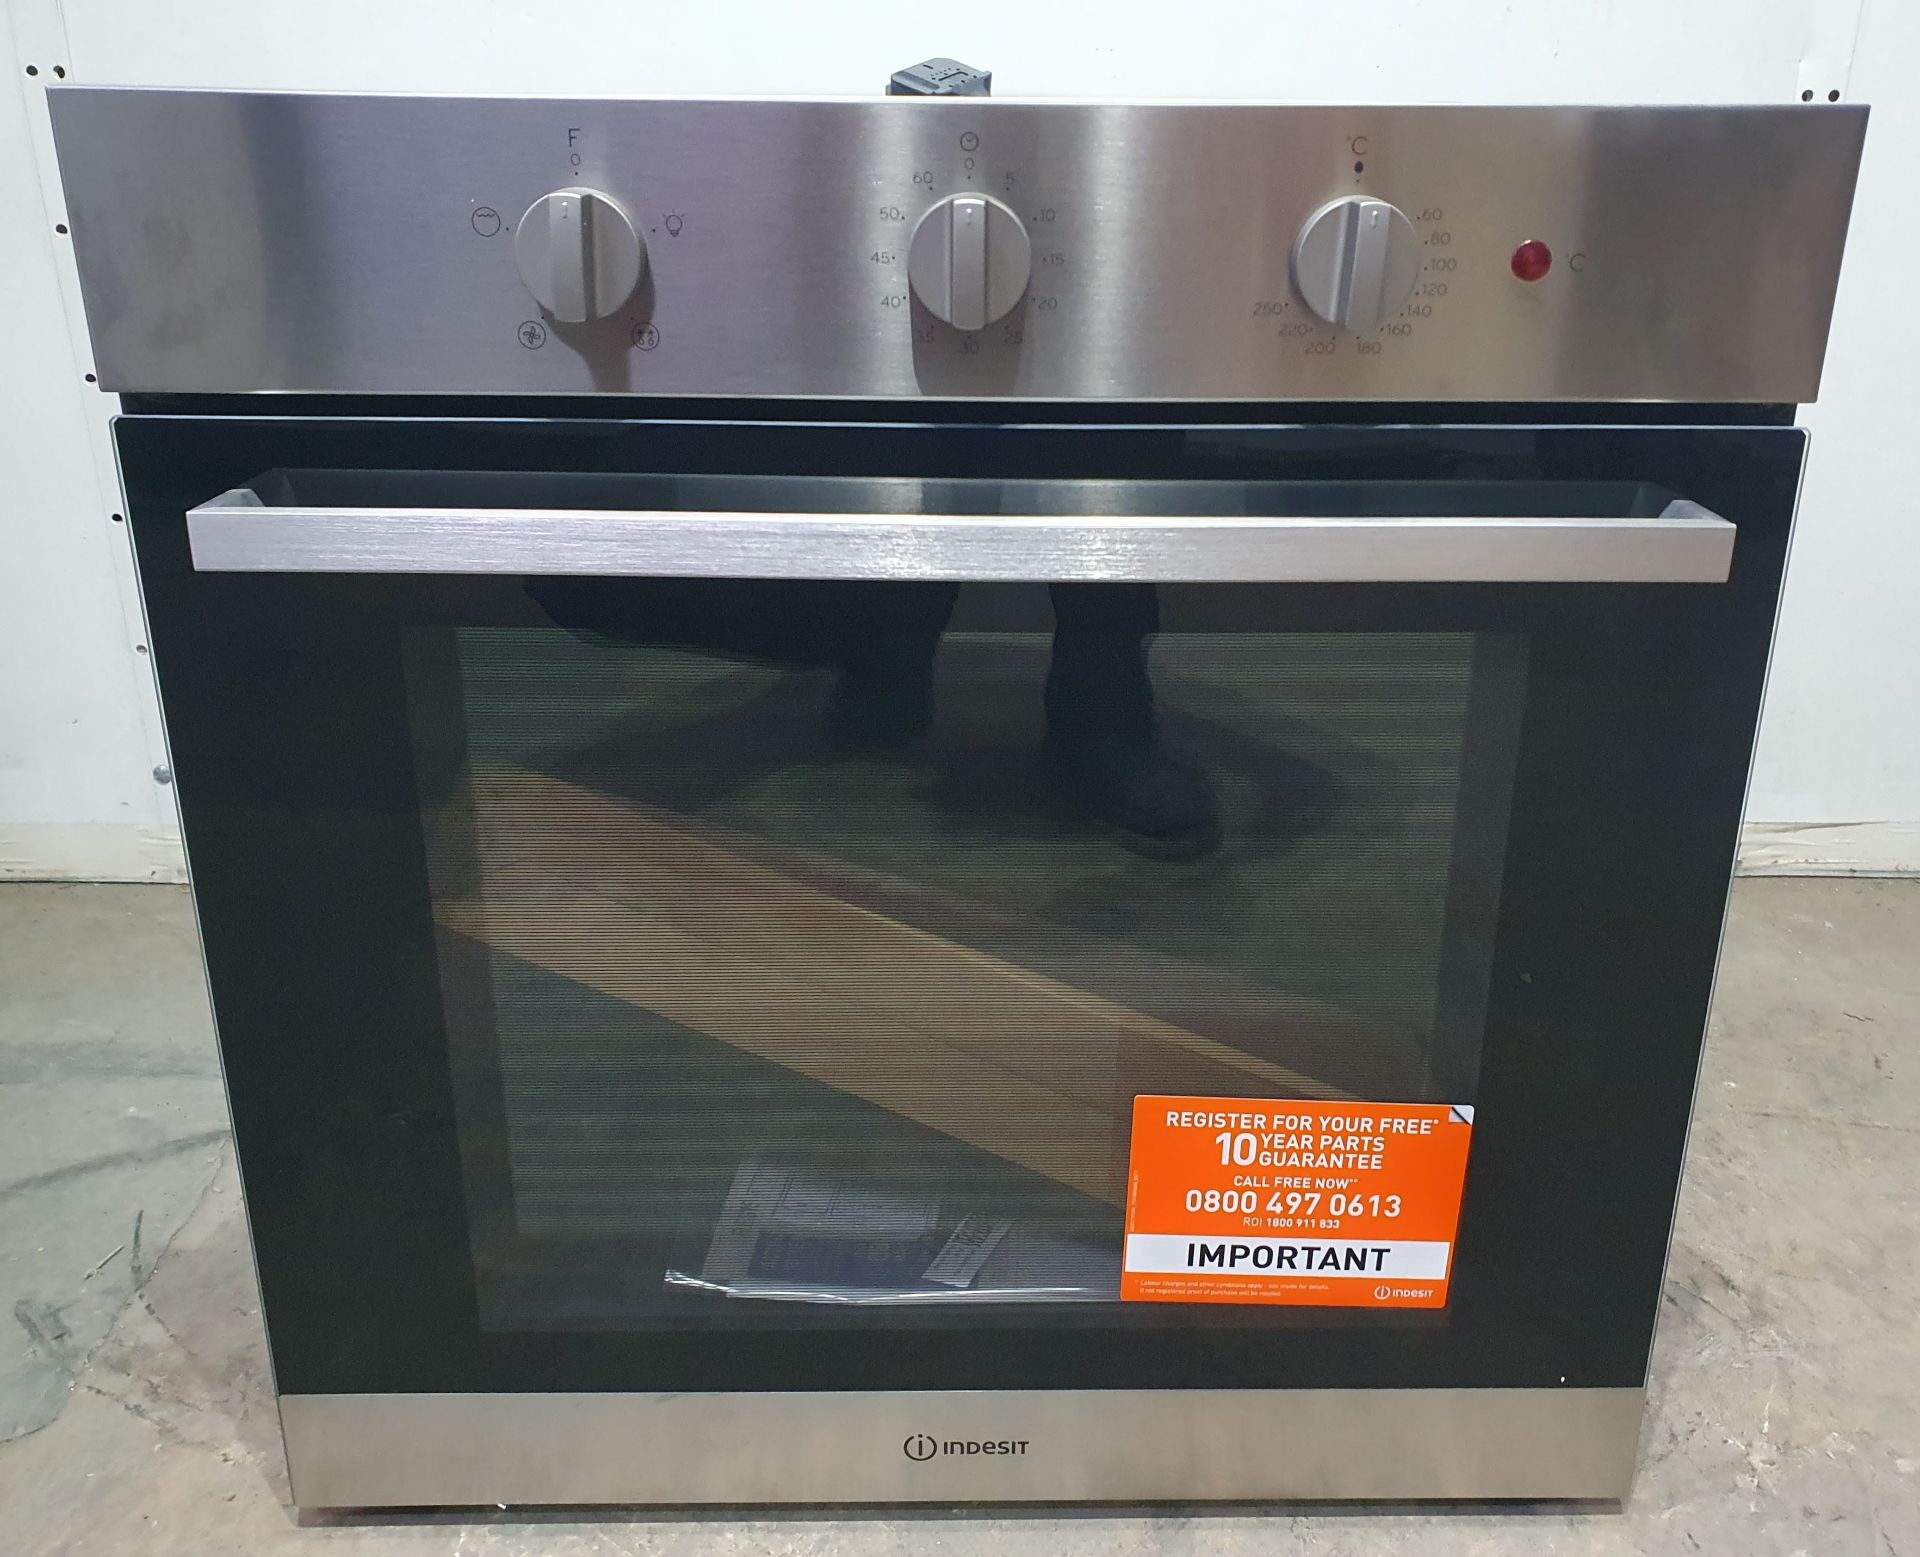 Ex-Display Indesit IFW 6330 IX UK Built-In Electric Single Oven - Stainless Steel